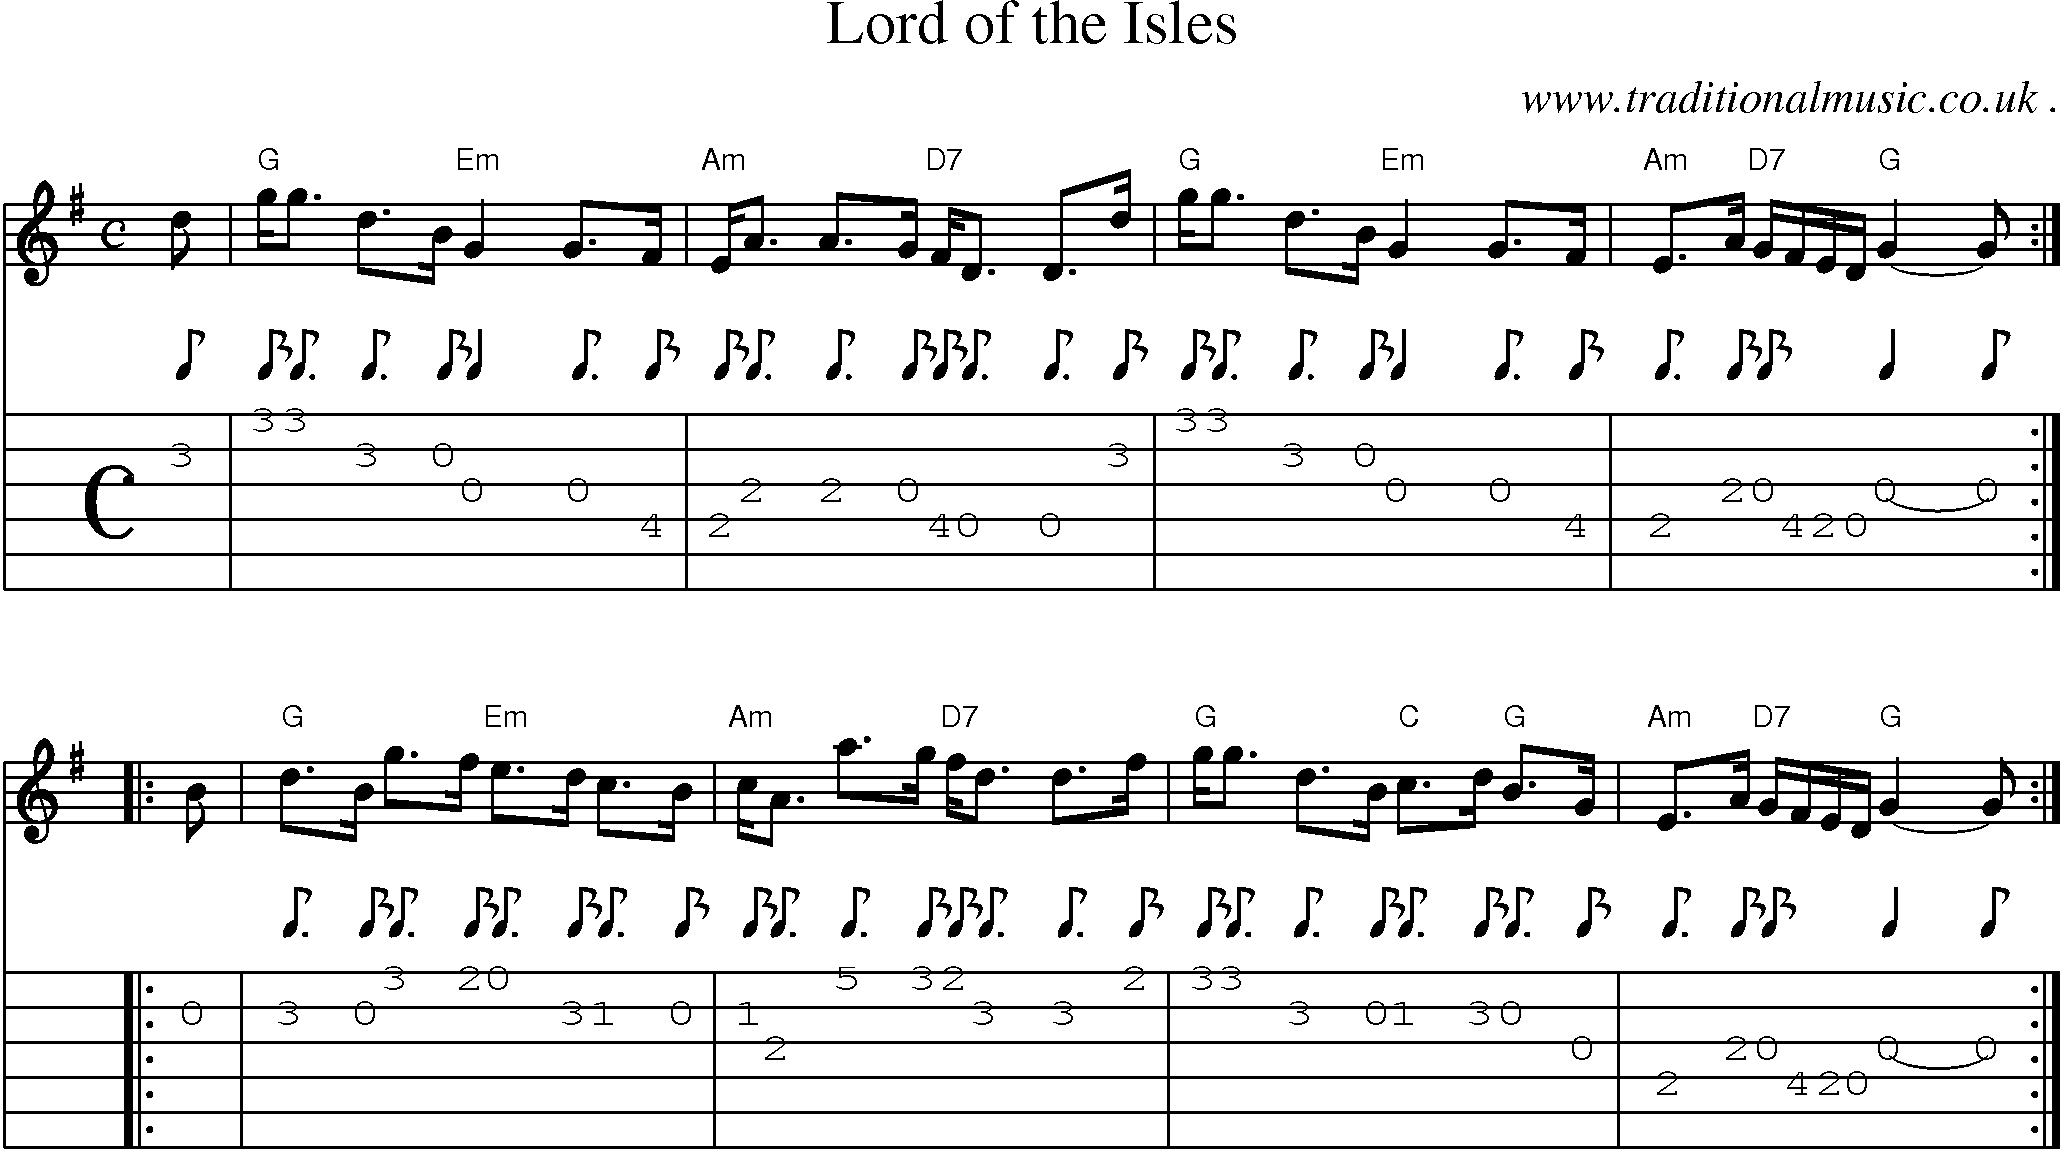 Sheet-music  score, Chords and Guitar Tabs for Lord Of The Isles